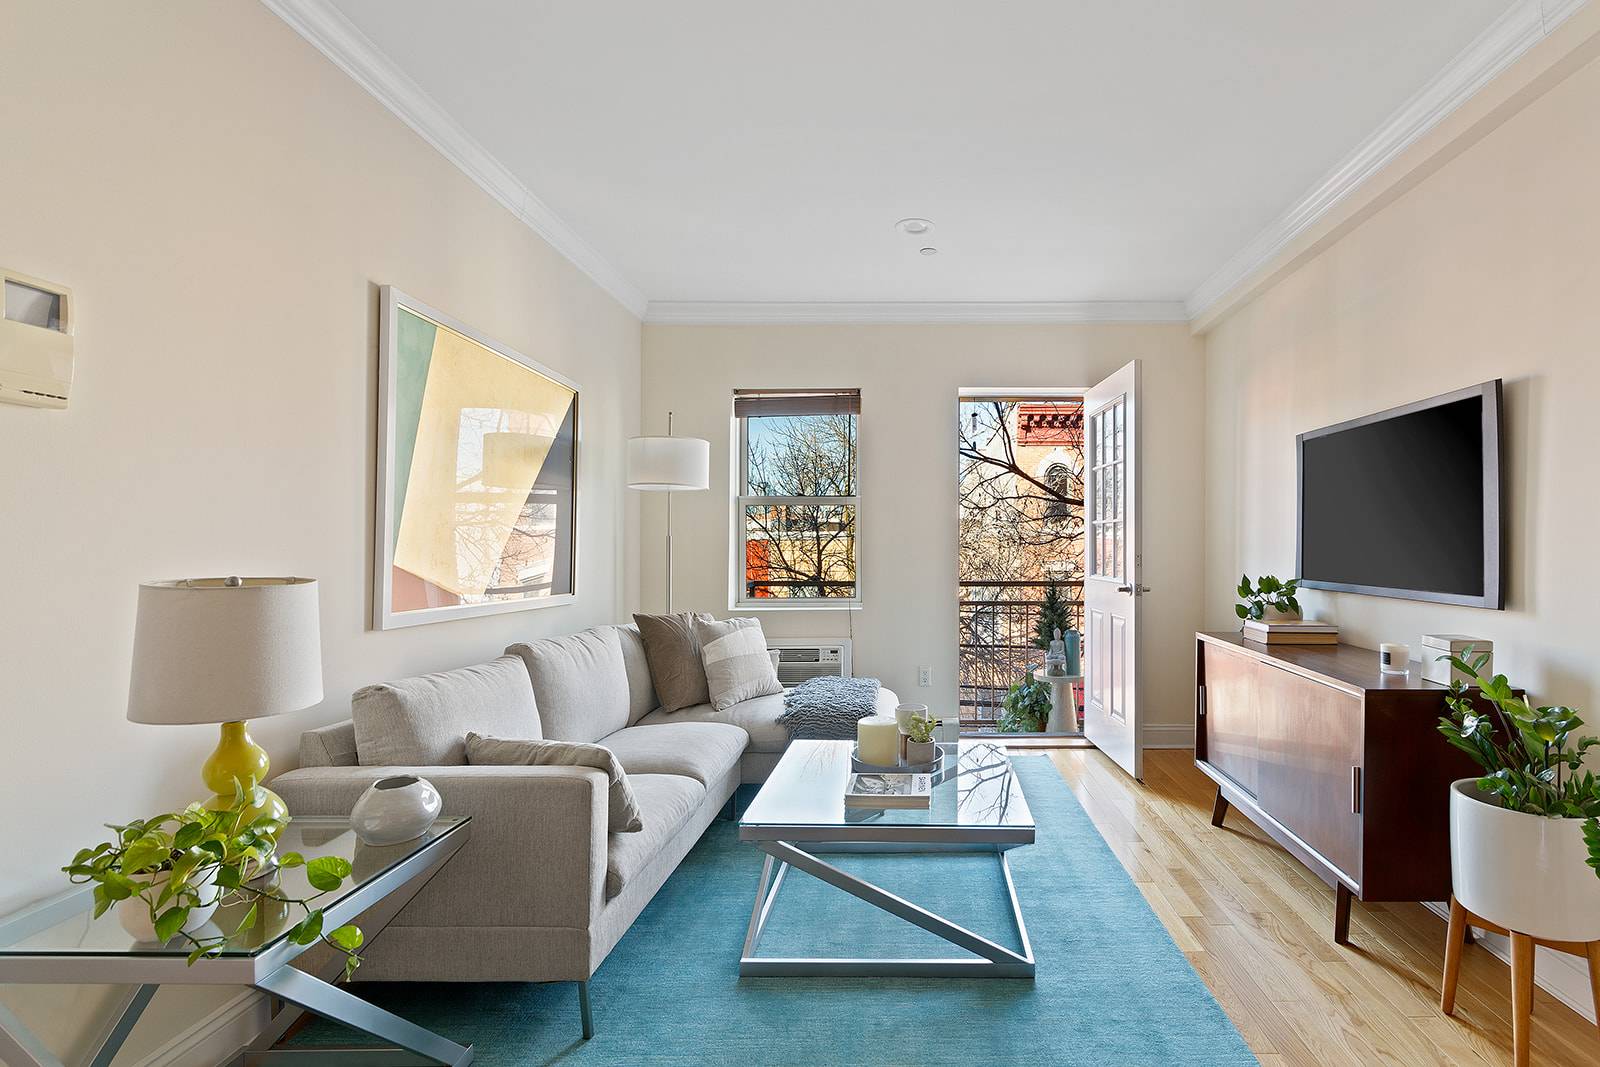 Just Listed ! Spacious and sun filled one bedroom Condo in Greenpoint with a generous layout.